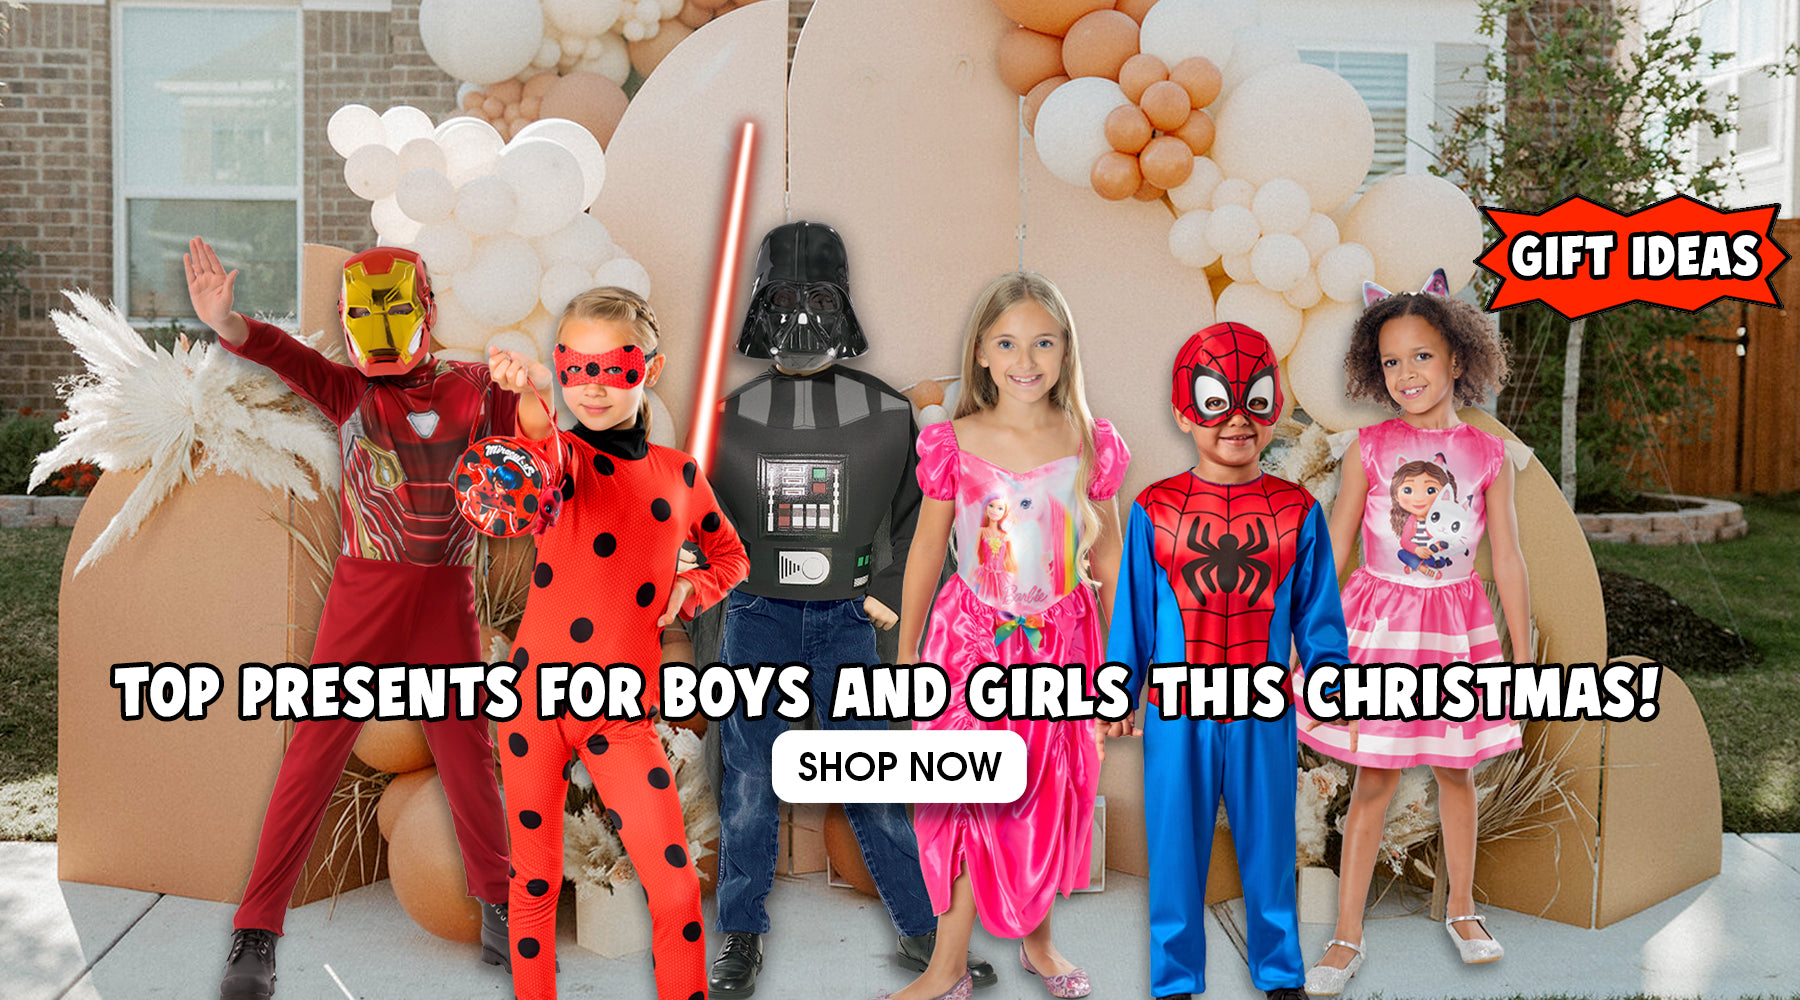 Looking for Christmas present ideas for boys and girls? Check out this curated list of great costumes ideas to make the perfect Xmas Gift!